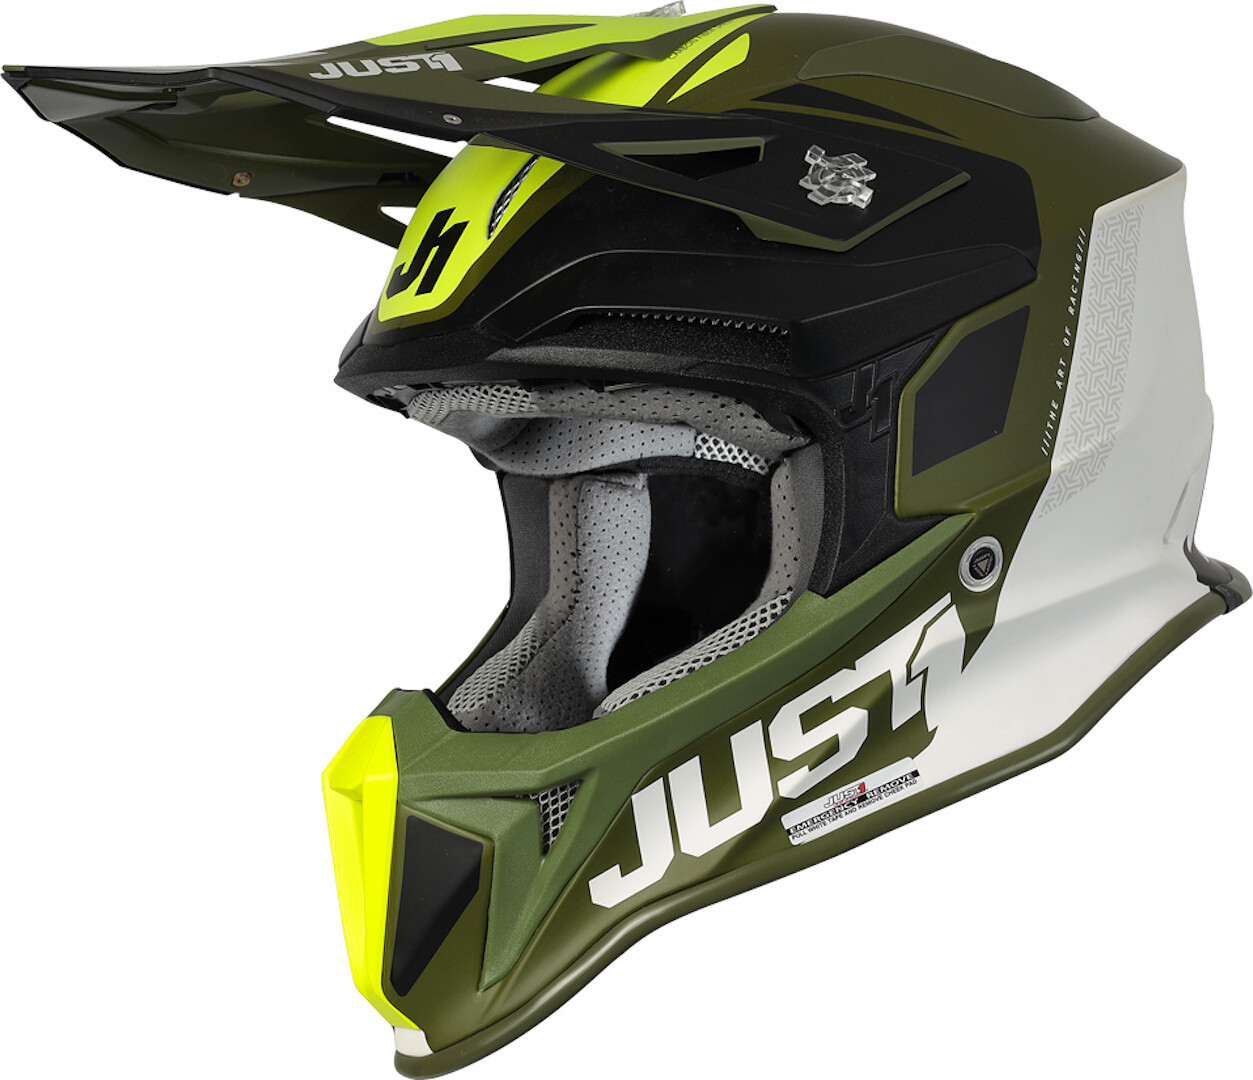 Image of Just1 J18 Pulsar Army Limited Edition MIPS Casco motocross, verde, dimensione XL